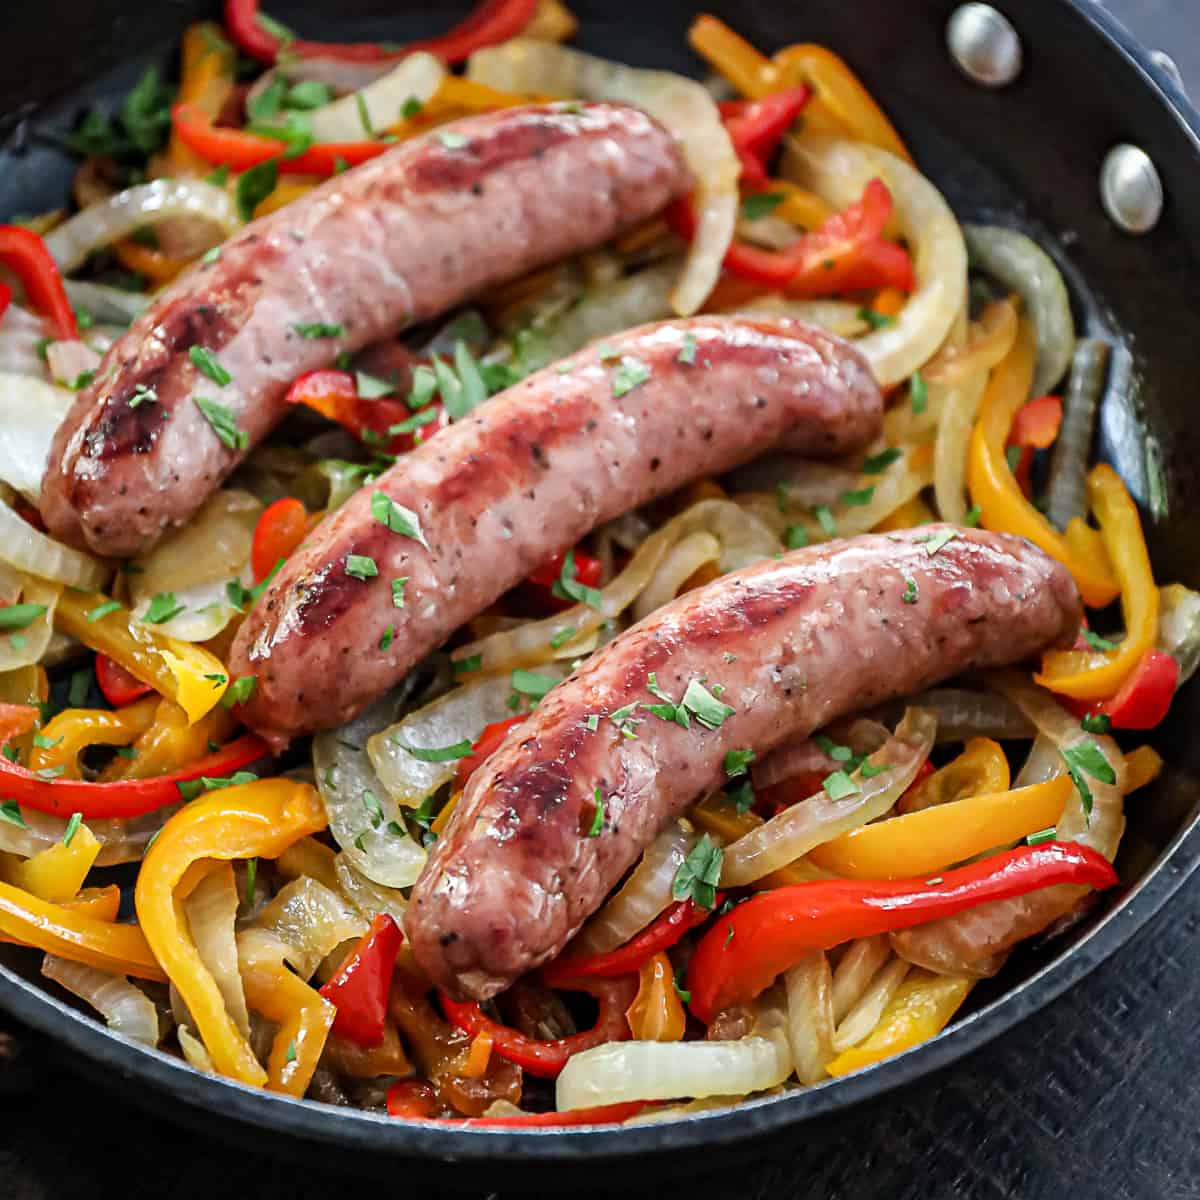 How To Cook Brats In Oven (Easy Baked Sausage Recipe) - Sip Bite Go